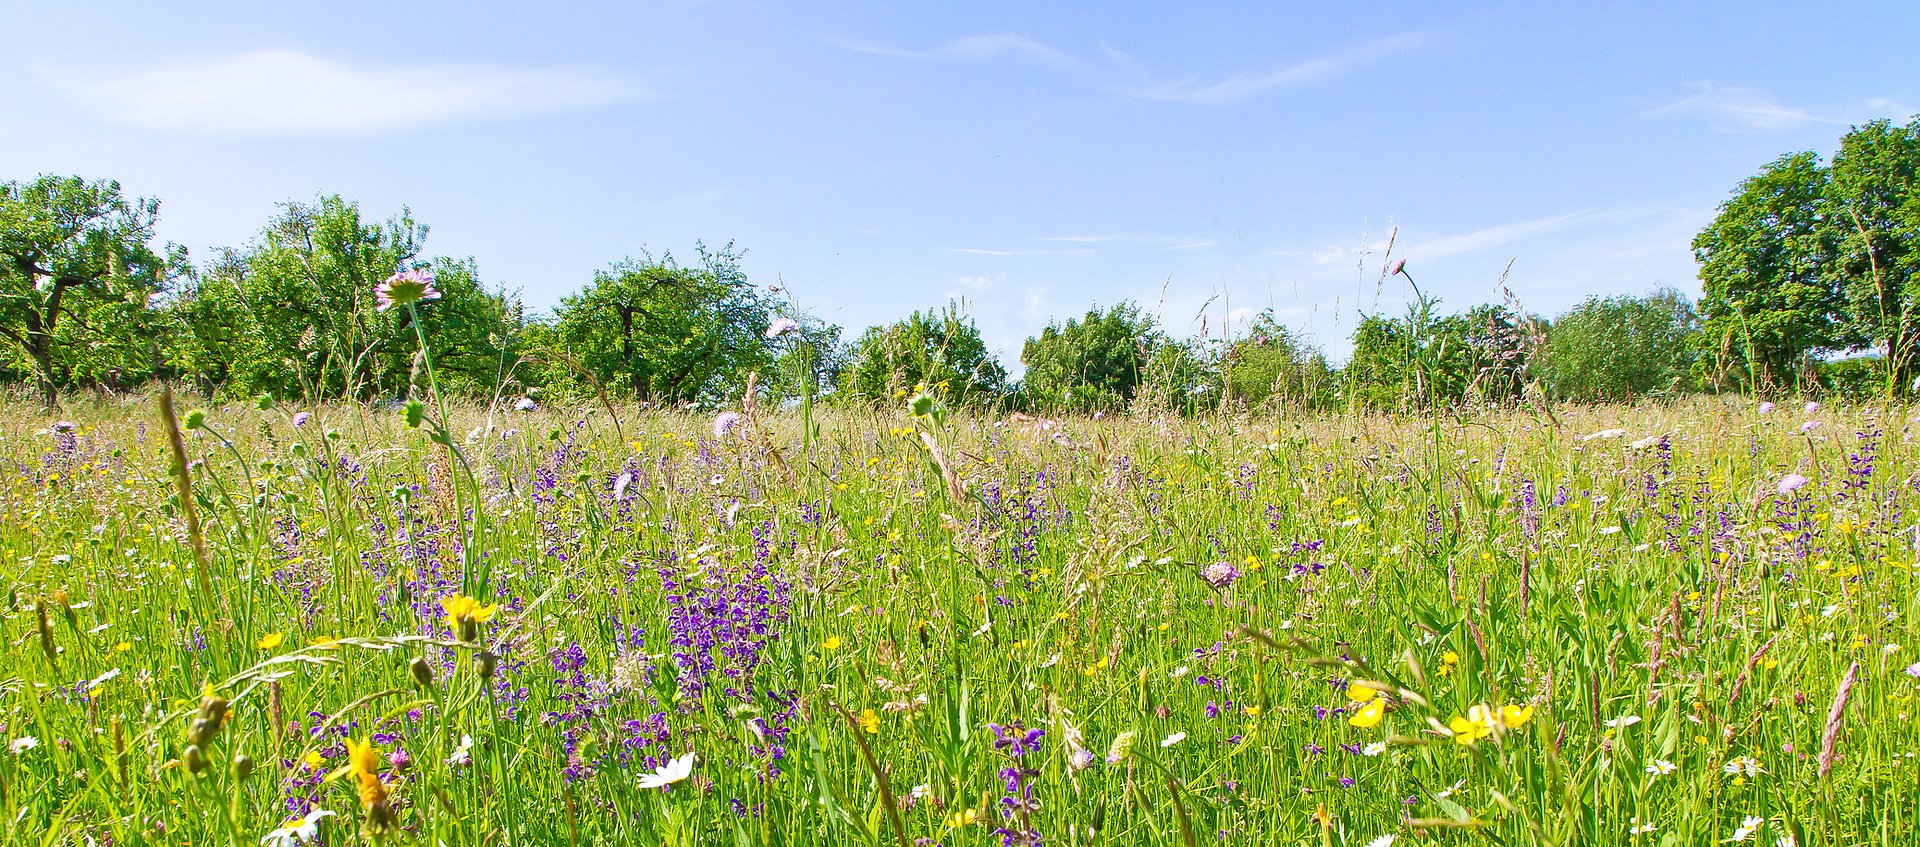 Grasslands full of flowers are not only beautiful they also provide many important services for humans. (Photo: Fotolia/ J. Fälchle)